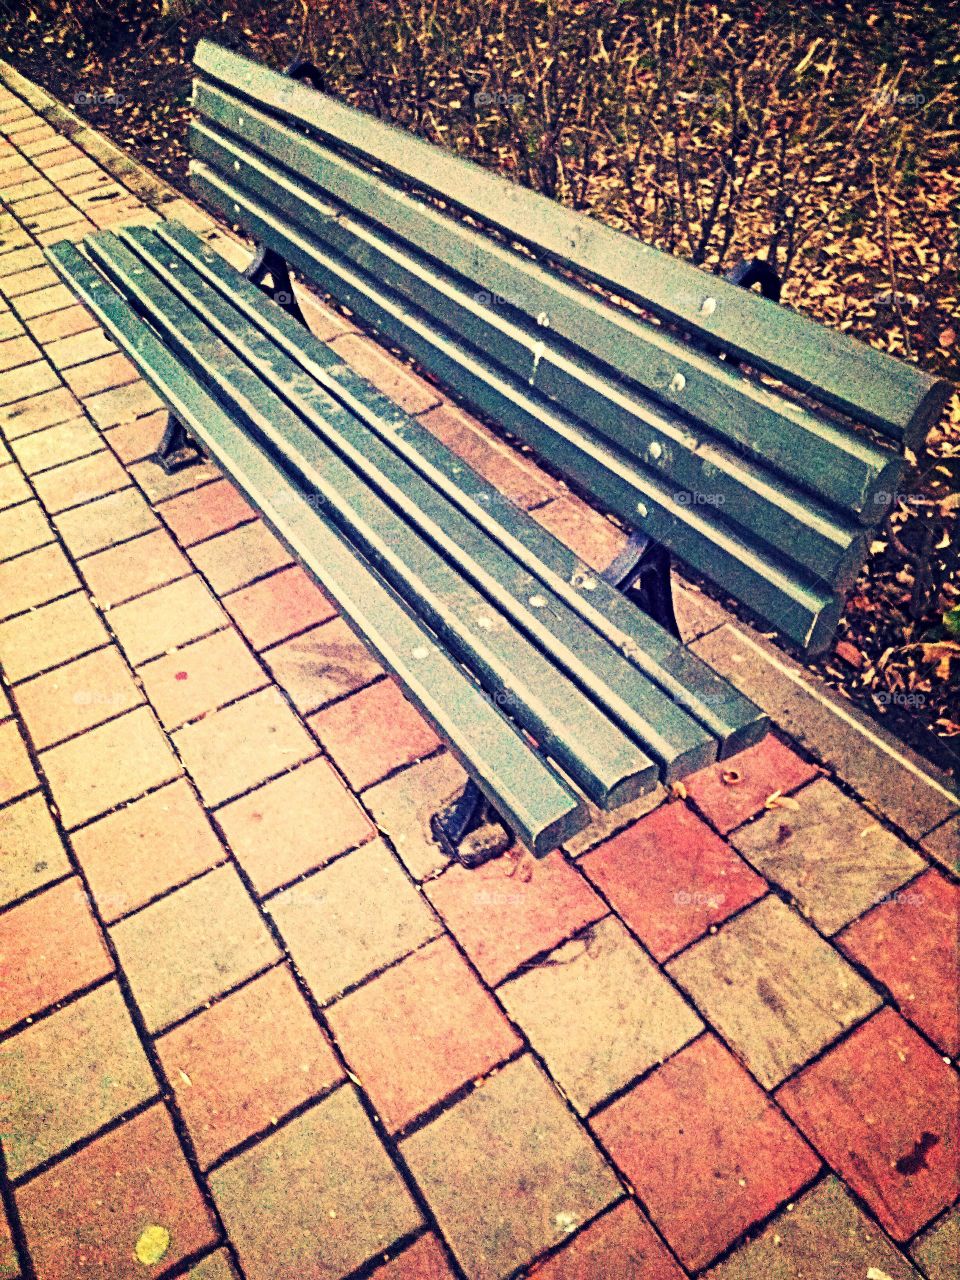 public bench on the pavement